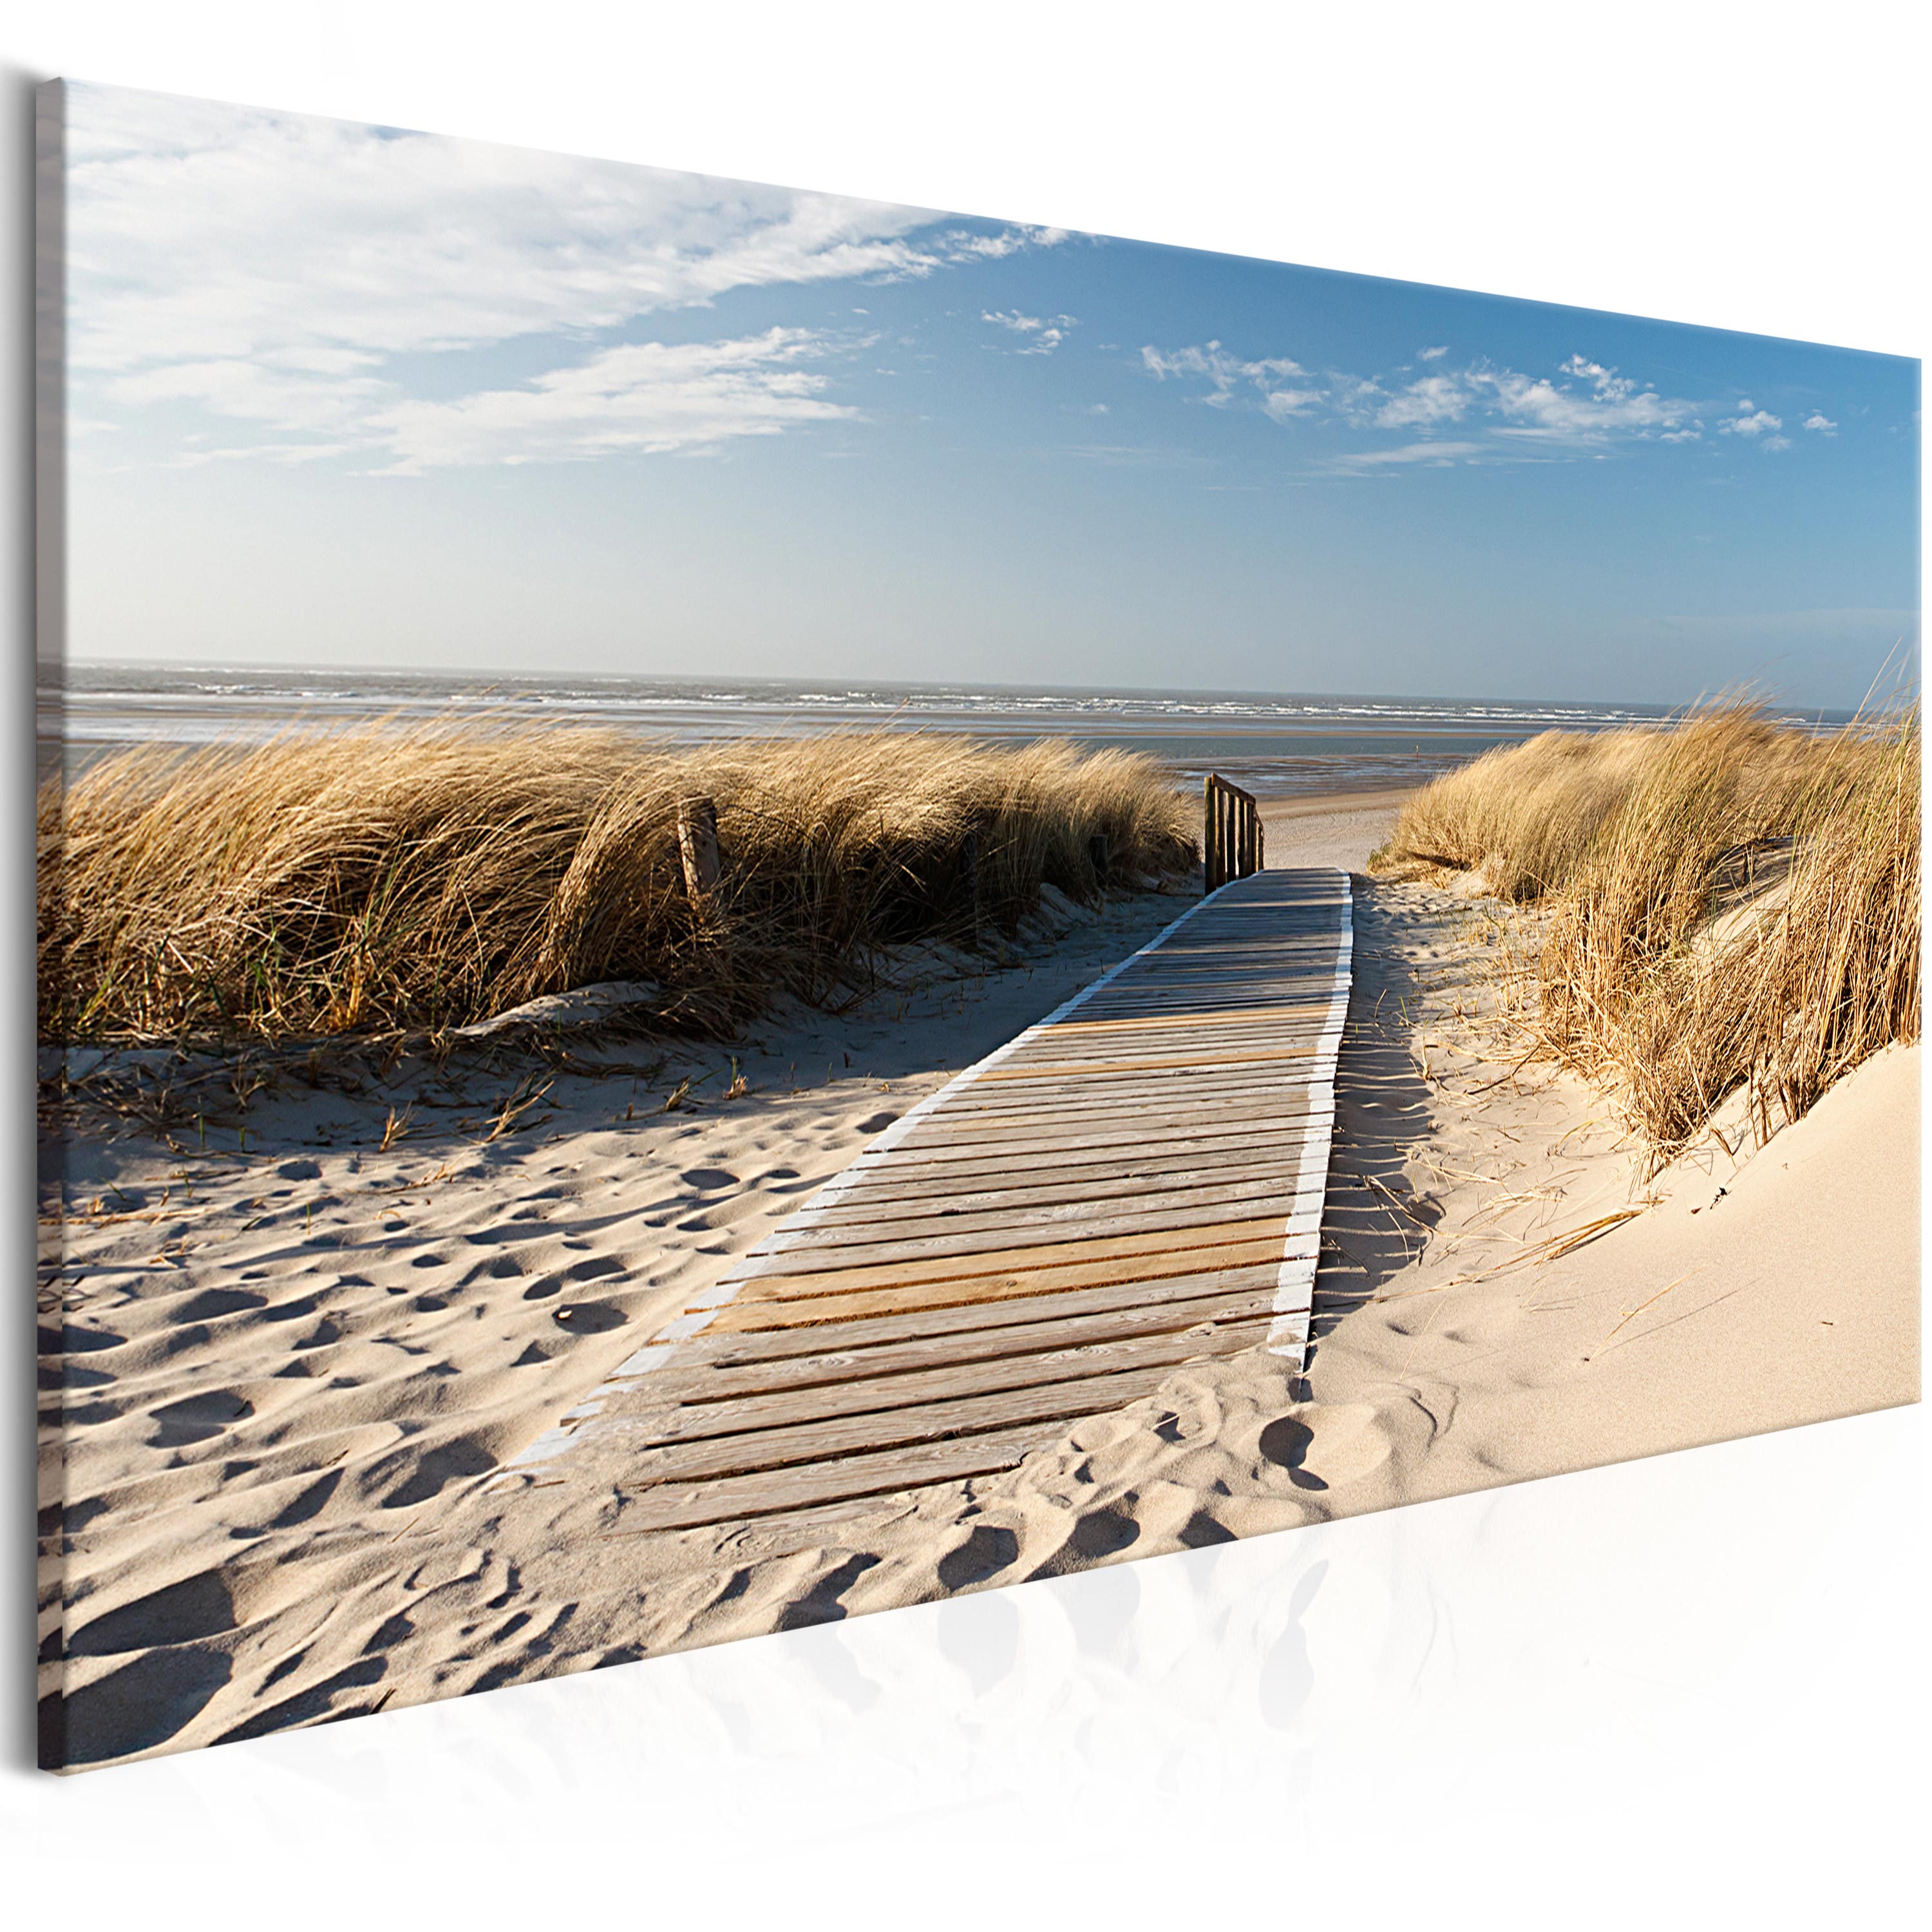 Canvas Print - Holiday at the Seaside (1 Part) Wide - 100x45